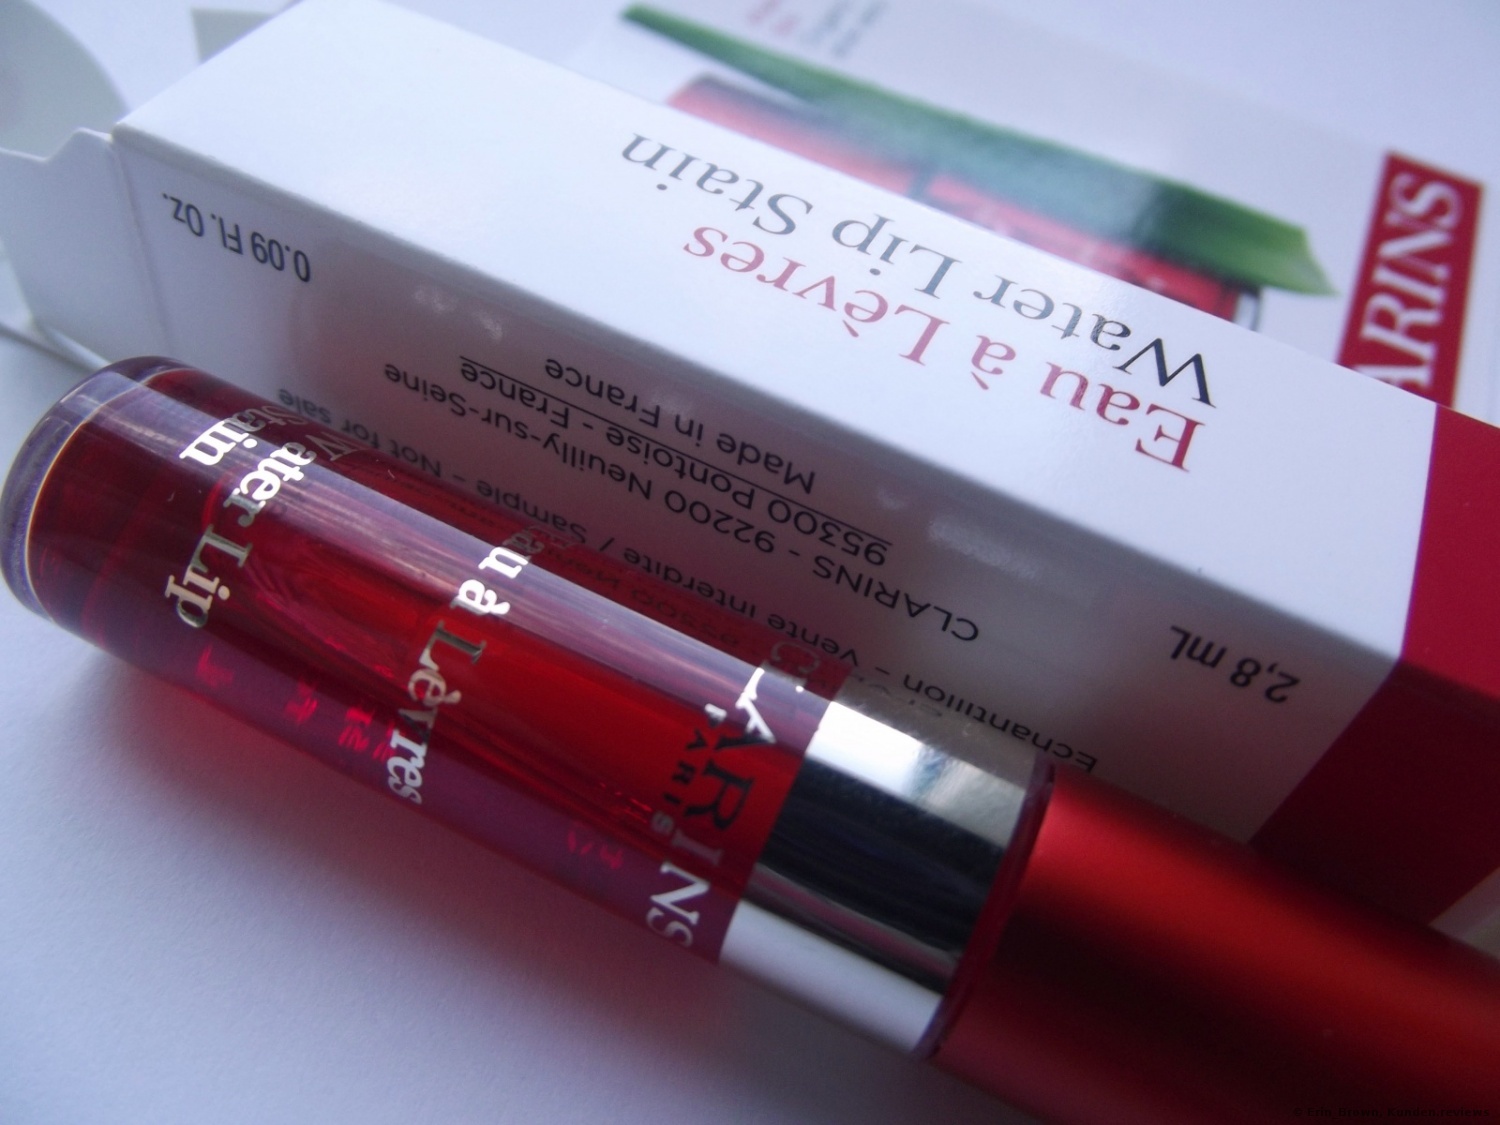 Clarins Water Lip Stain Lipgloss Foto